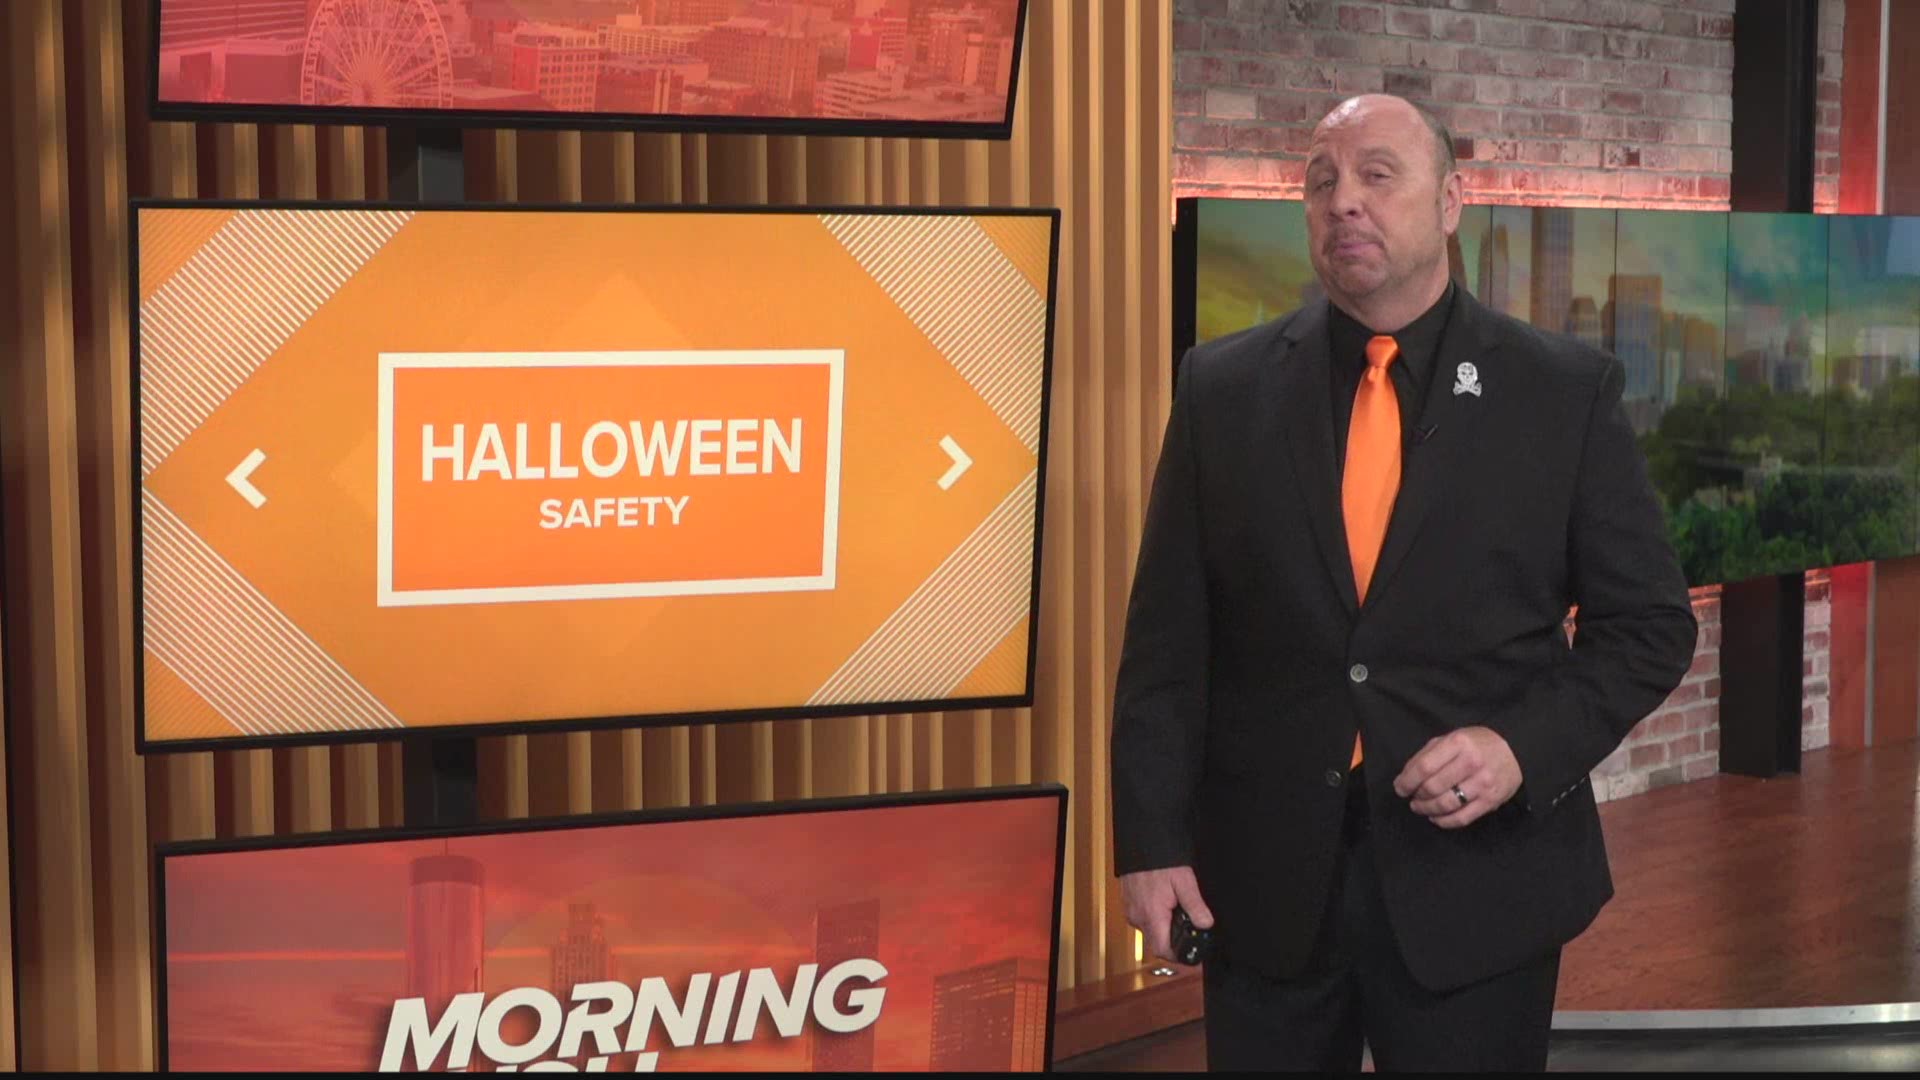 11Alive's Crash Clark details how you can have a good time and stay safe on Halloween.